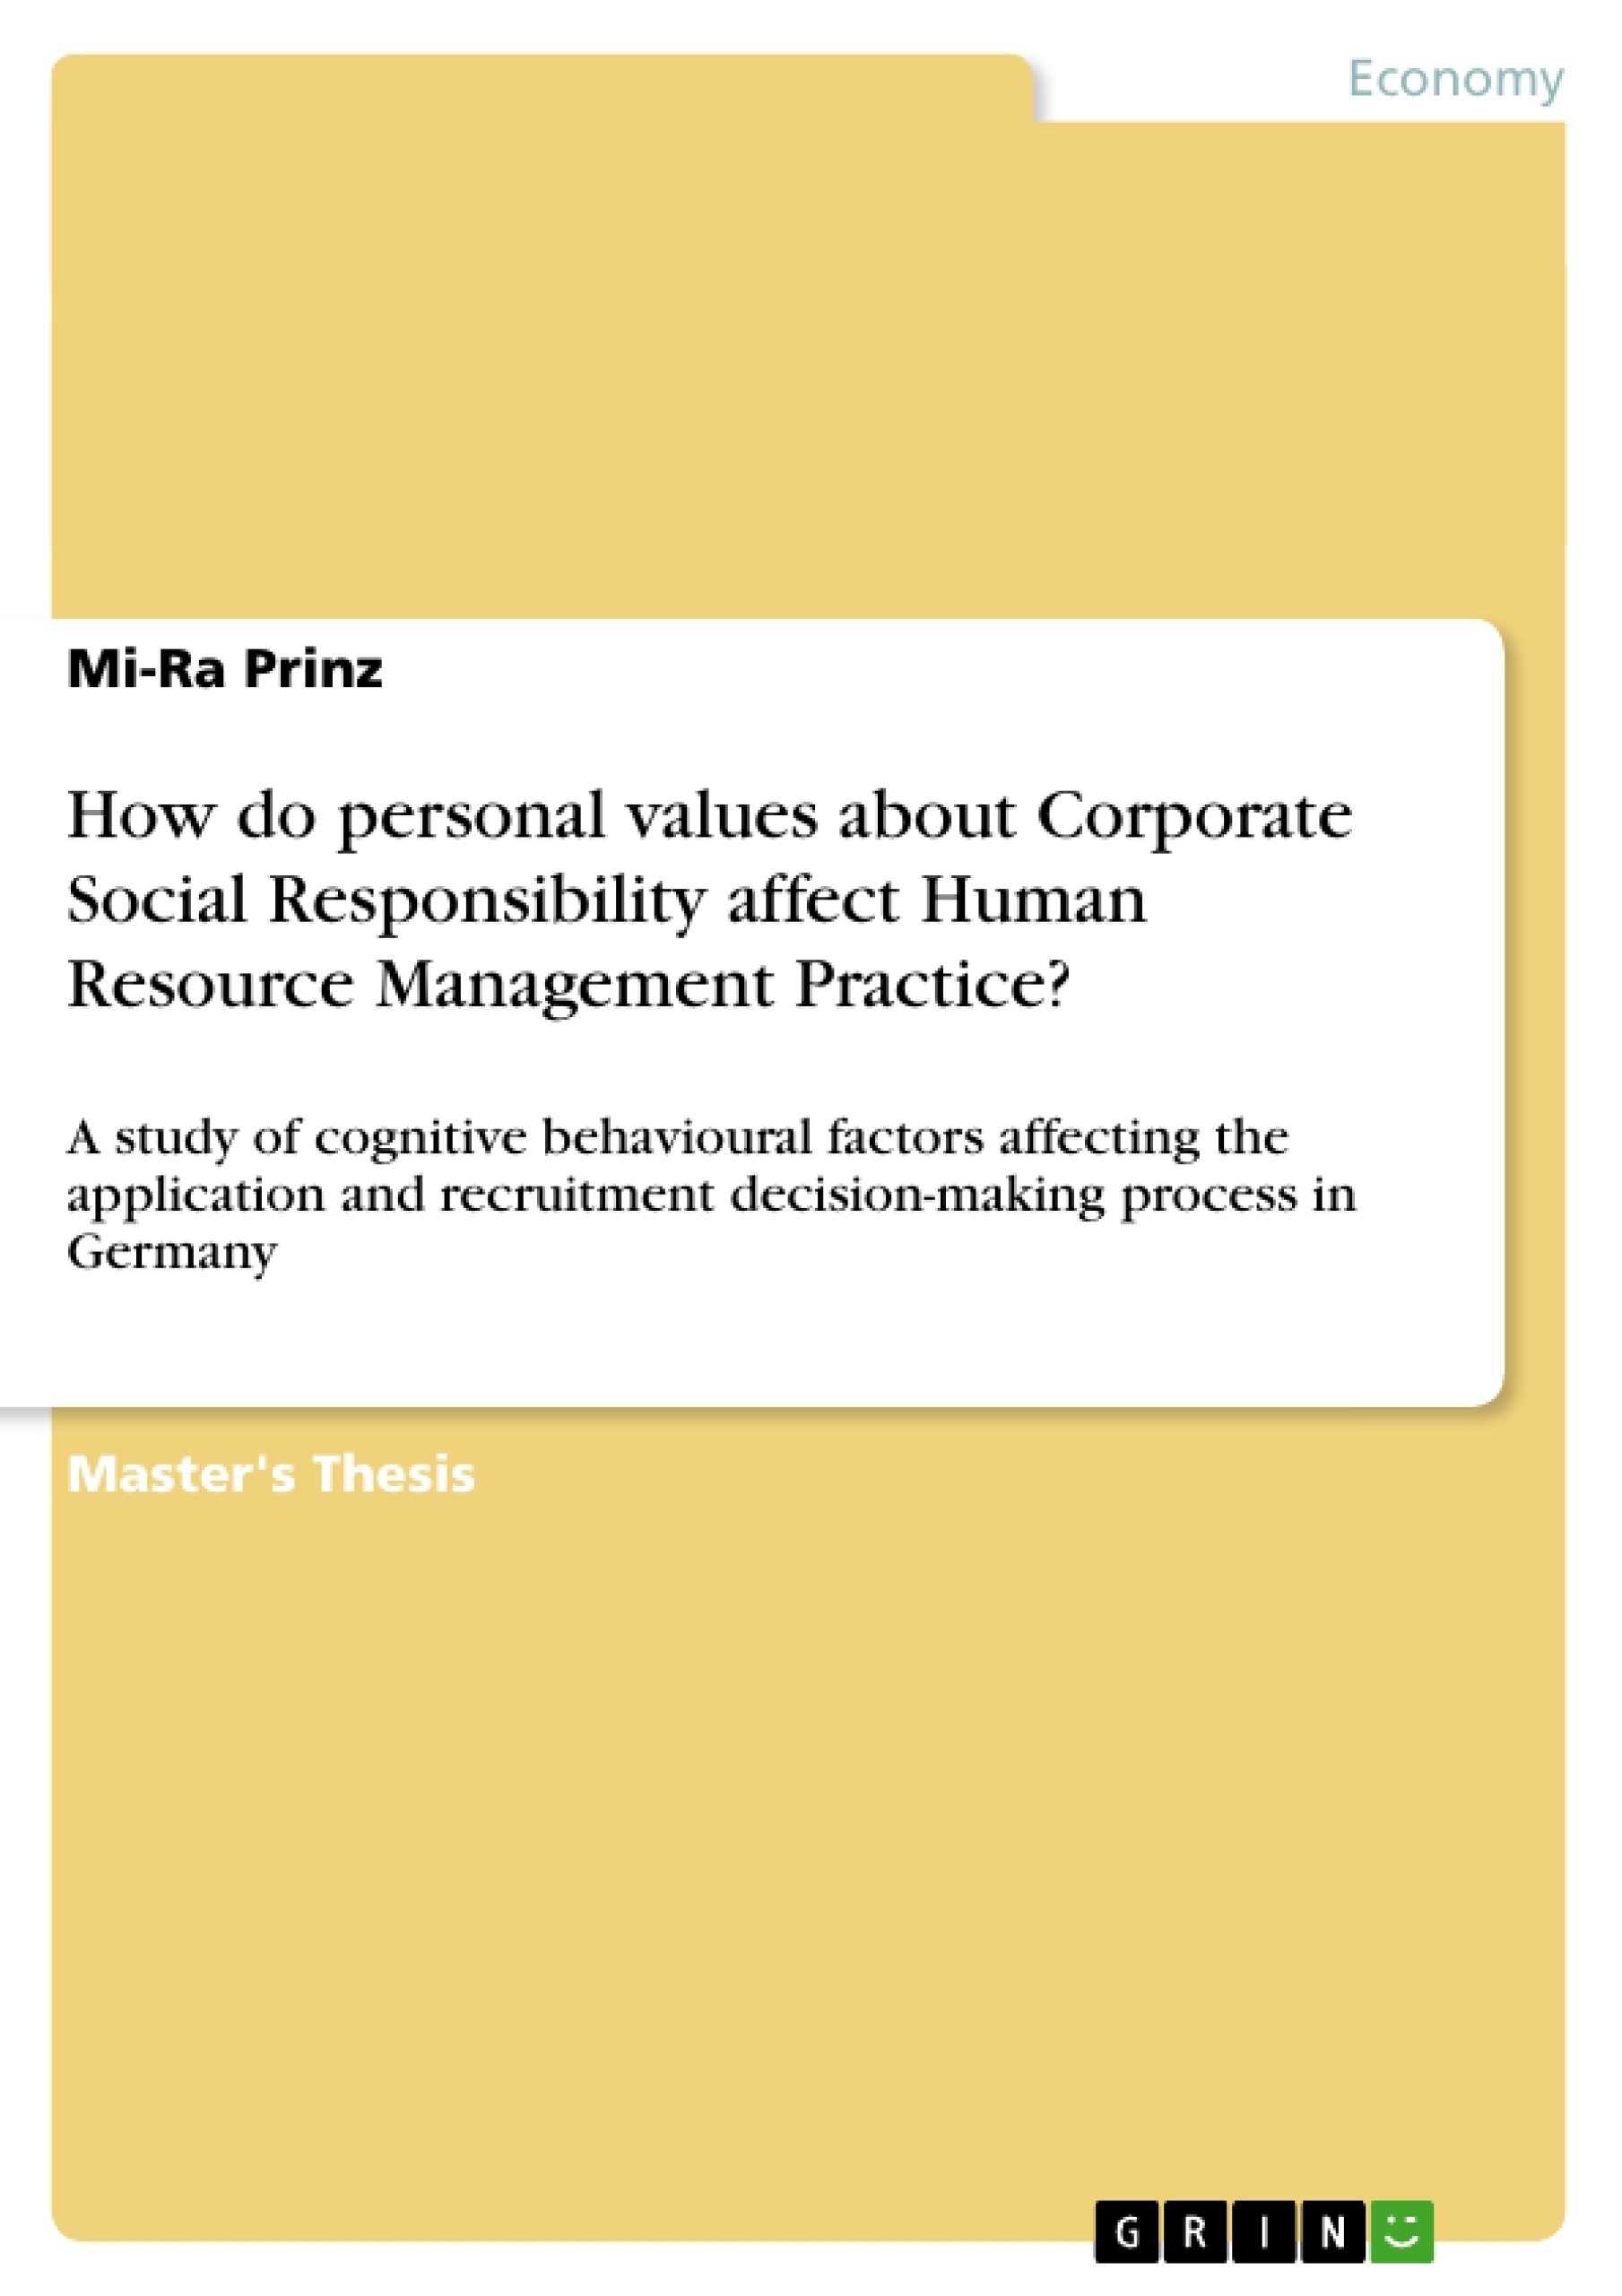 Title: How do personal values about Corporate Social Responsibility affect Human Resource Management Practice?